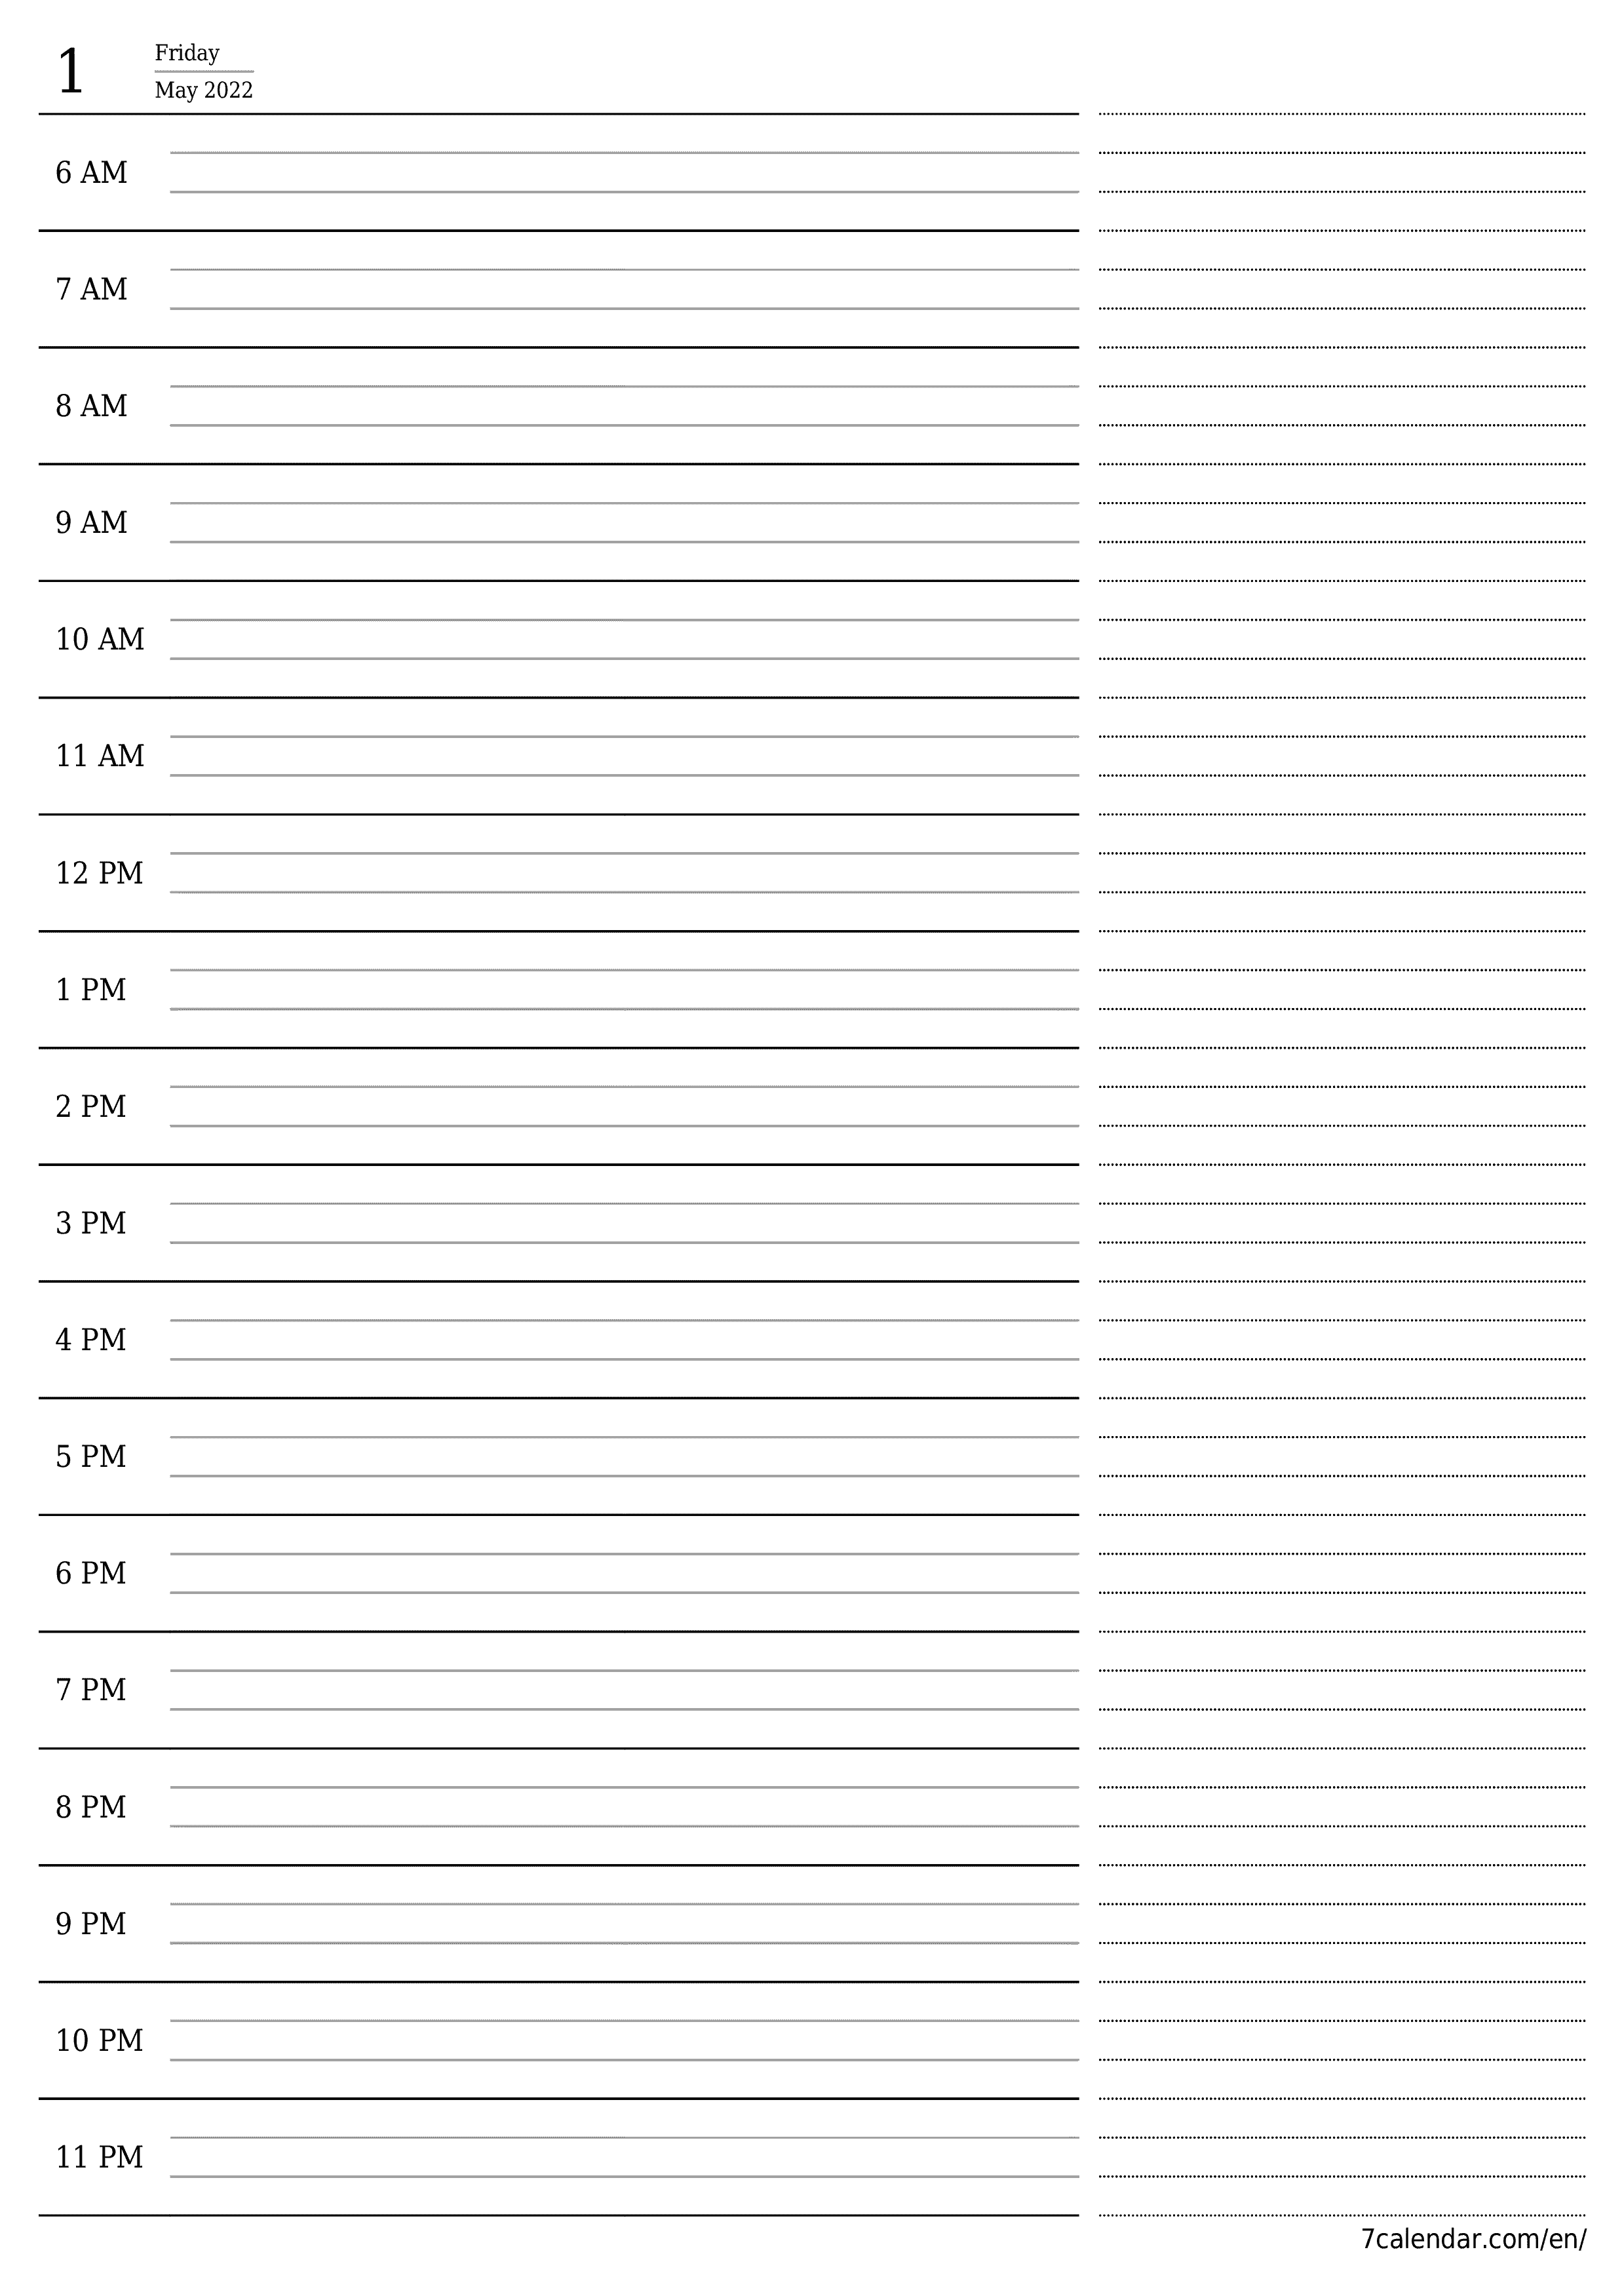 Blank daily printable calendar and planner for day May 2022 with notes, save and print to PDF PNG English - 7calendar.com